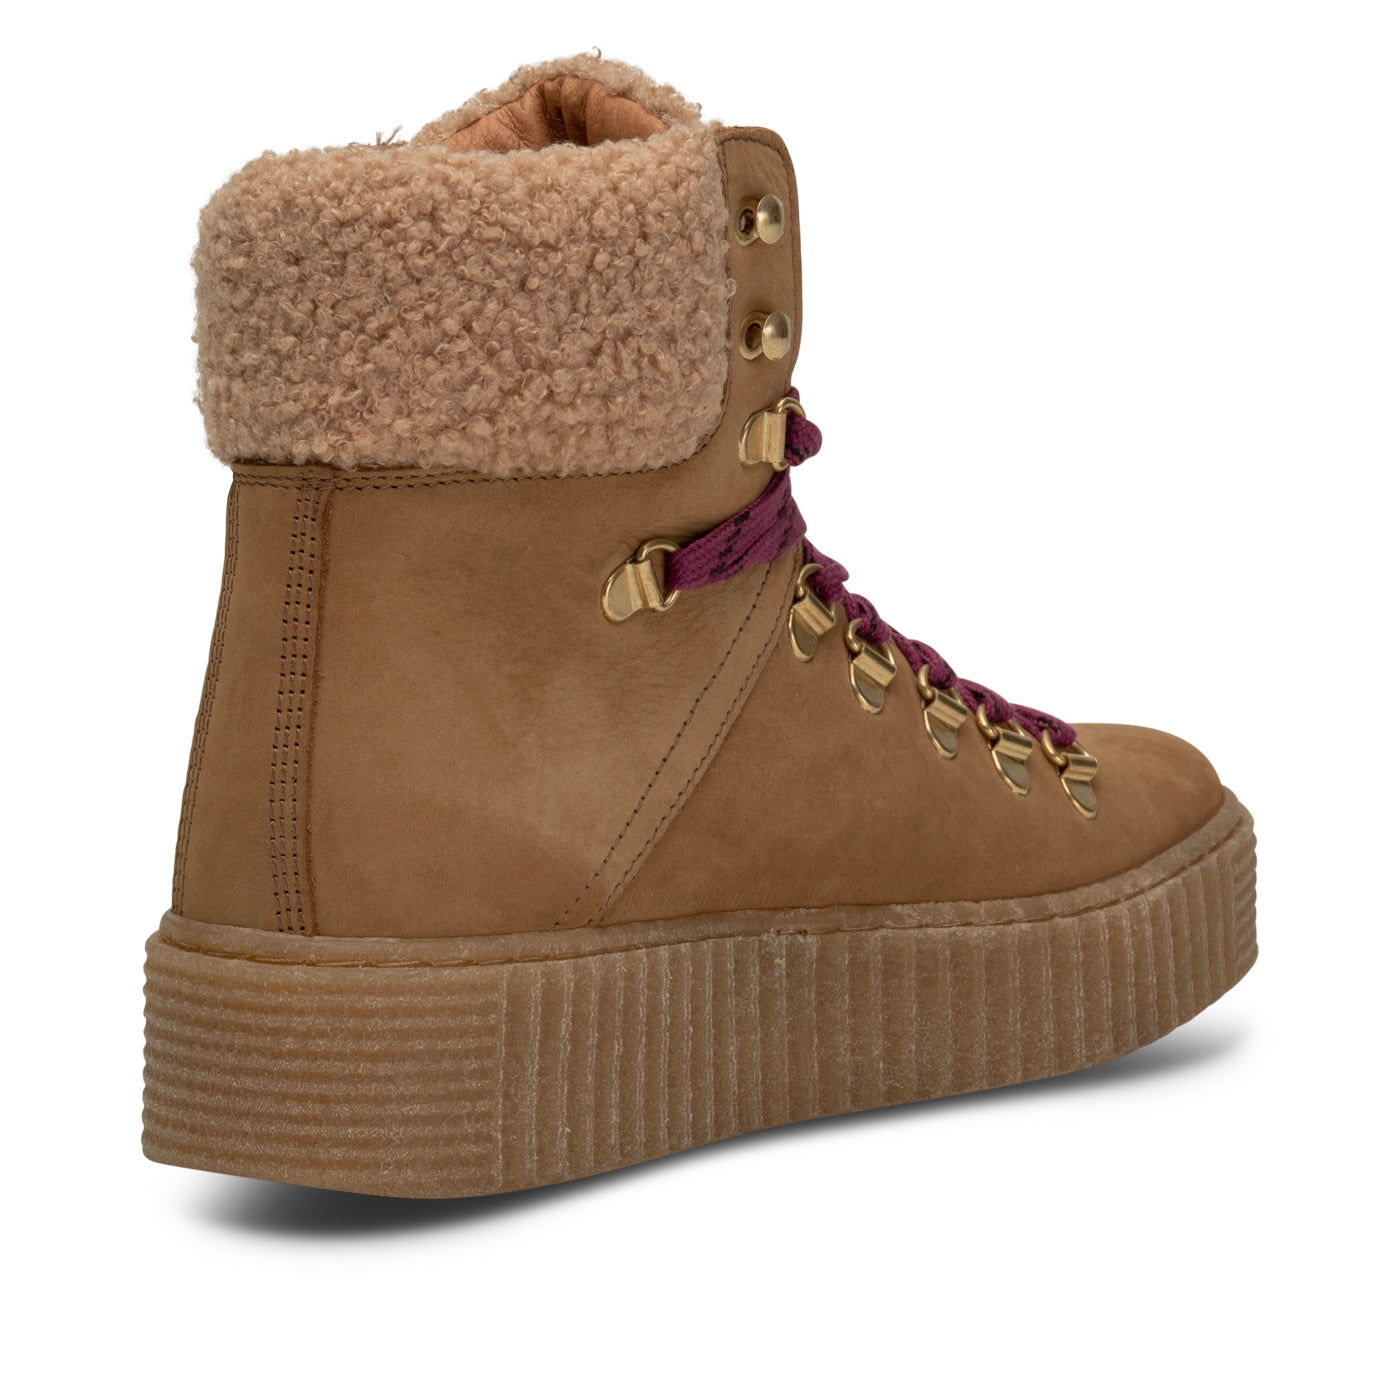 SHOE THE BEAR WOMENS Agda Boot Nubuck Leather Boots 153 CAMEL